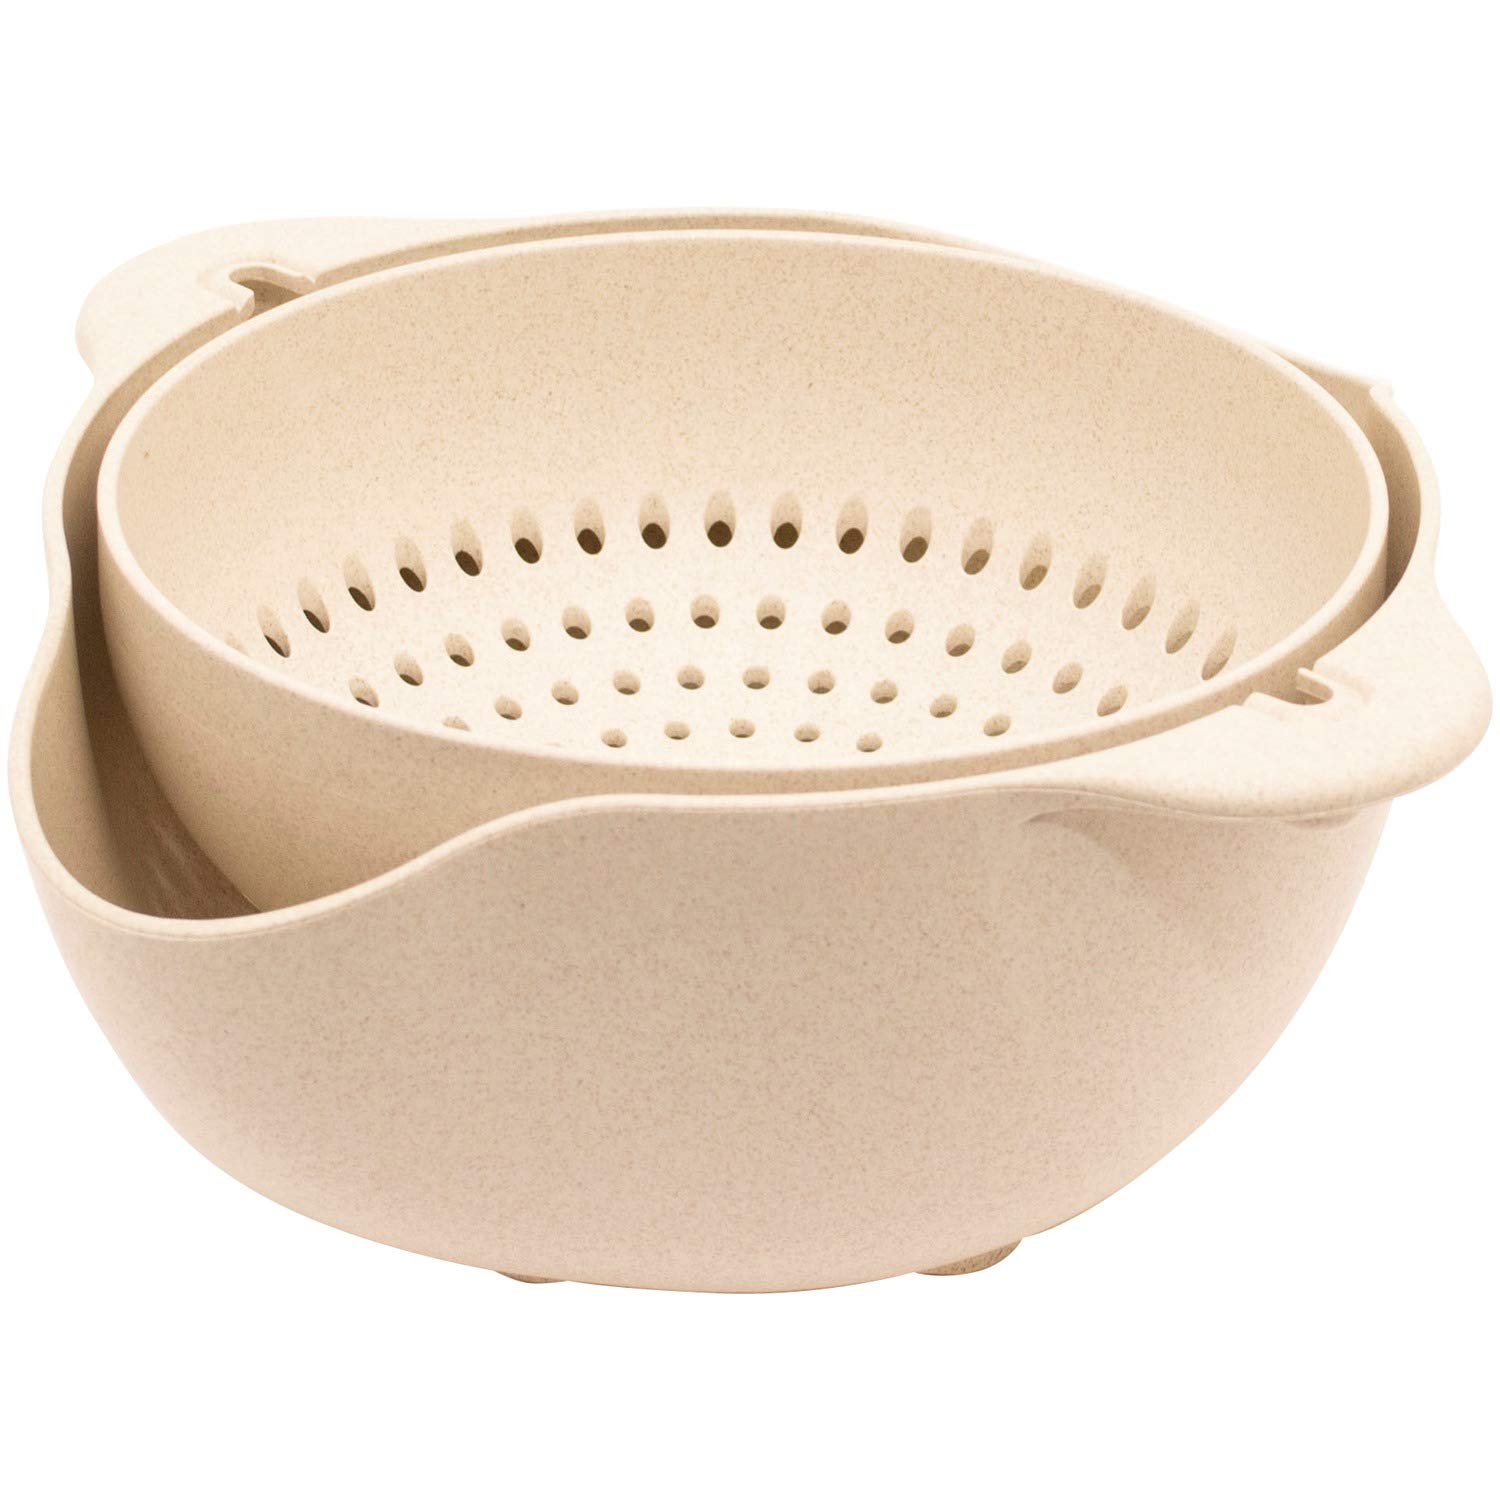 Starfrit Gourmet Eco Small Colander And Bowl, Tan